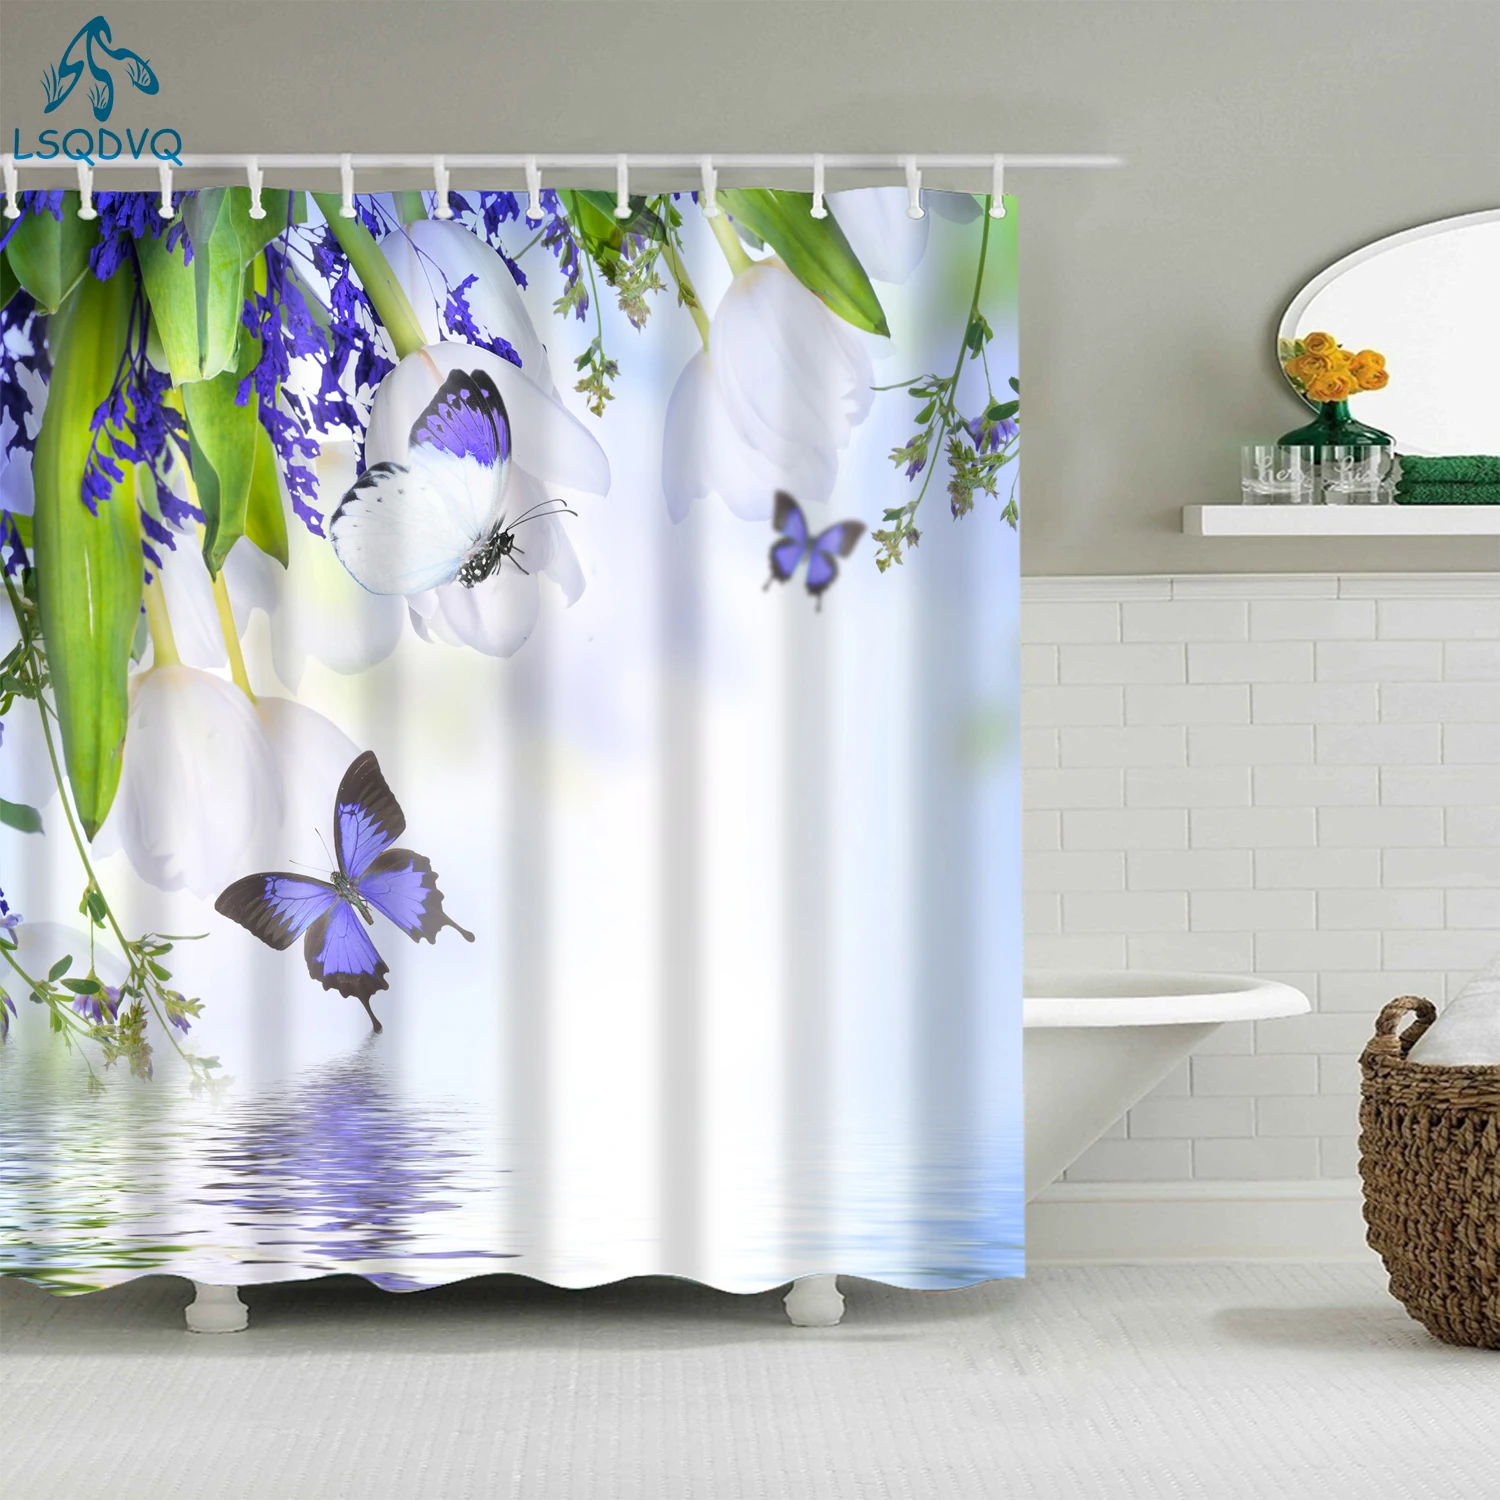 Trees Leaves Flowers Plant Rose Lotus Buddha Sunflowers Shower Curtains Bathroom Curtain Polyester Waterproof Frabic with Hooks